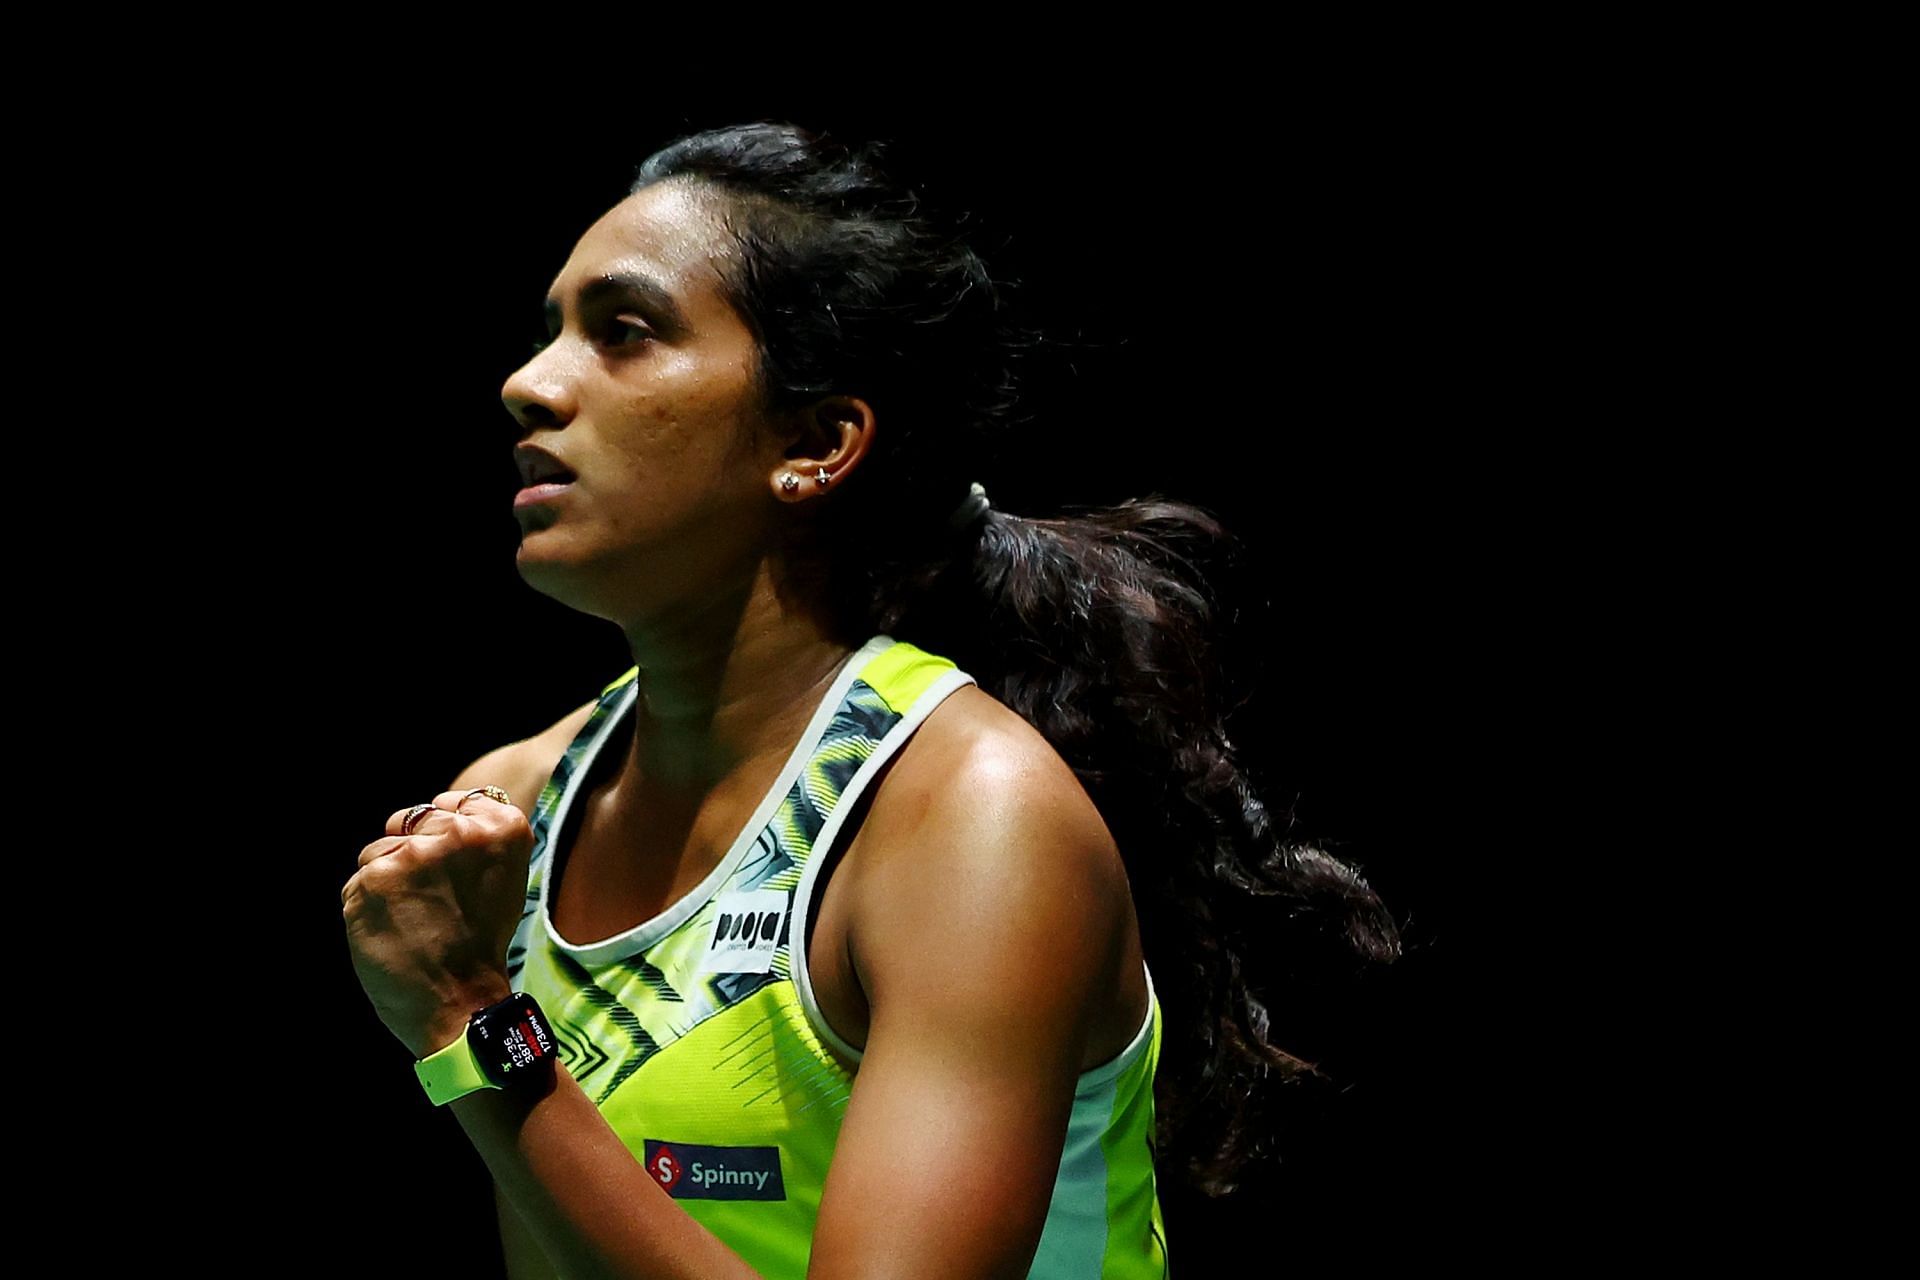 PV Sindhu will be one of the biggest stars to watch at the 2022 CWG from the Indian contingent. (Image courtesy: Getty Images)